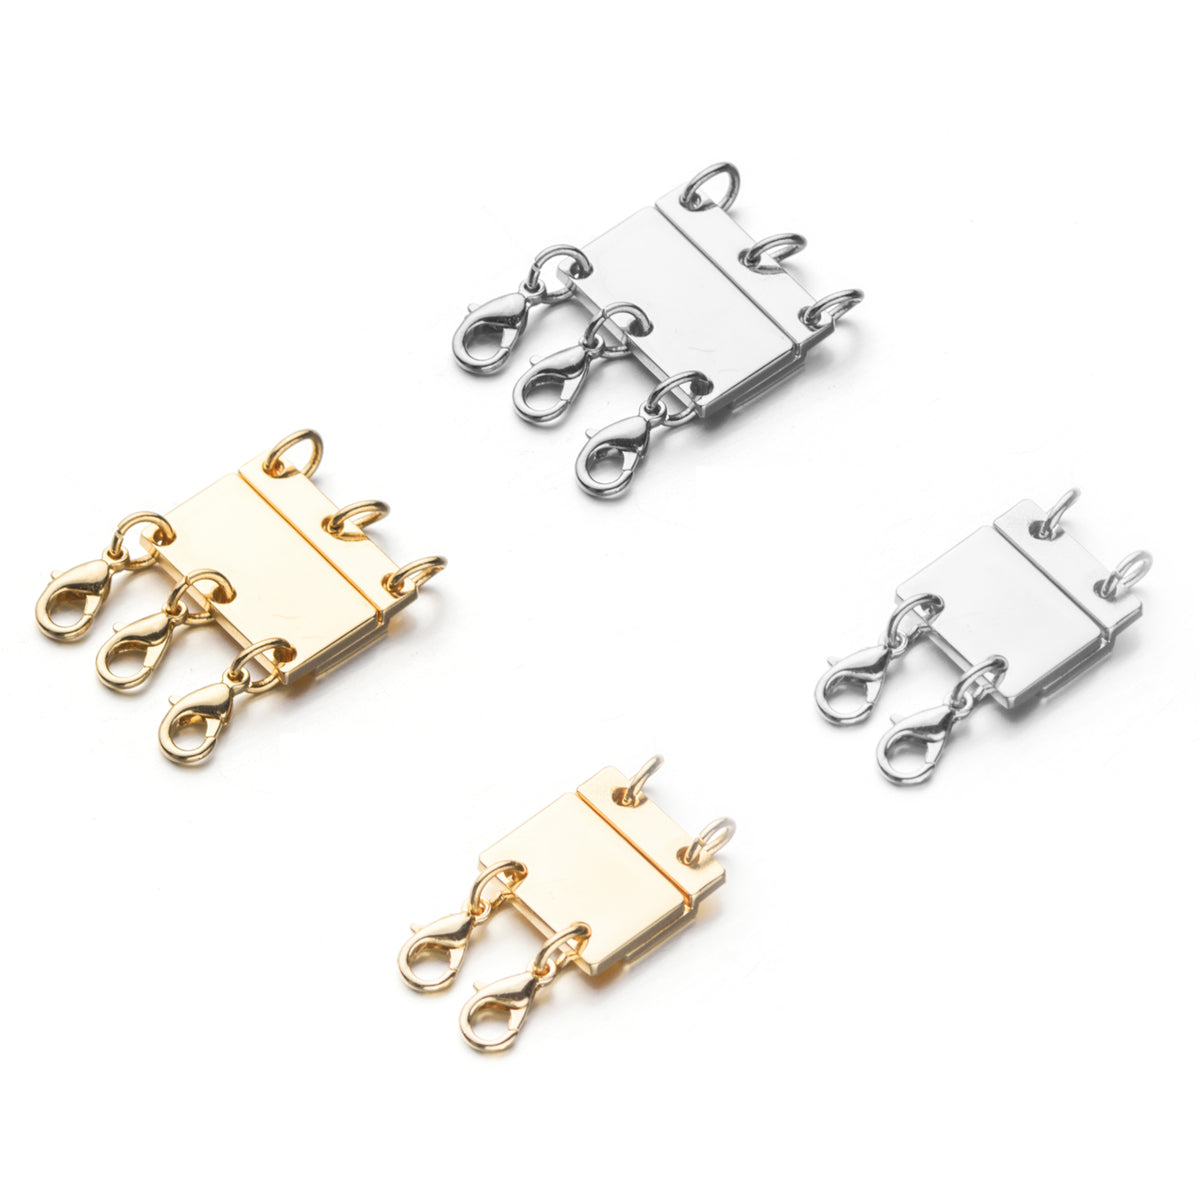 COHEALI 4 Pcs Necklace Buckle Magnet Hooks Necklace Layering Clasps  Necklace Tube Lock Connector Magnetic Necklace Pendant Clasp Connectors  Bails for